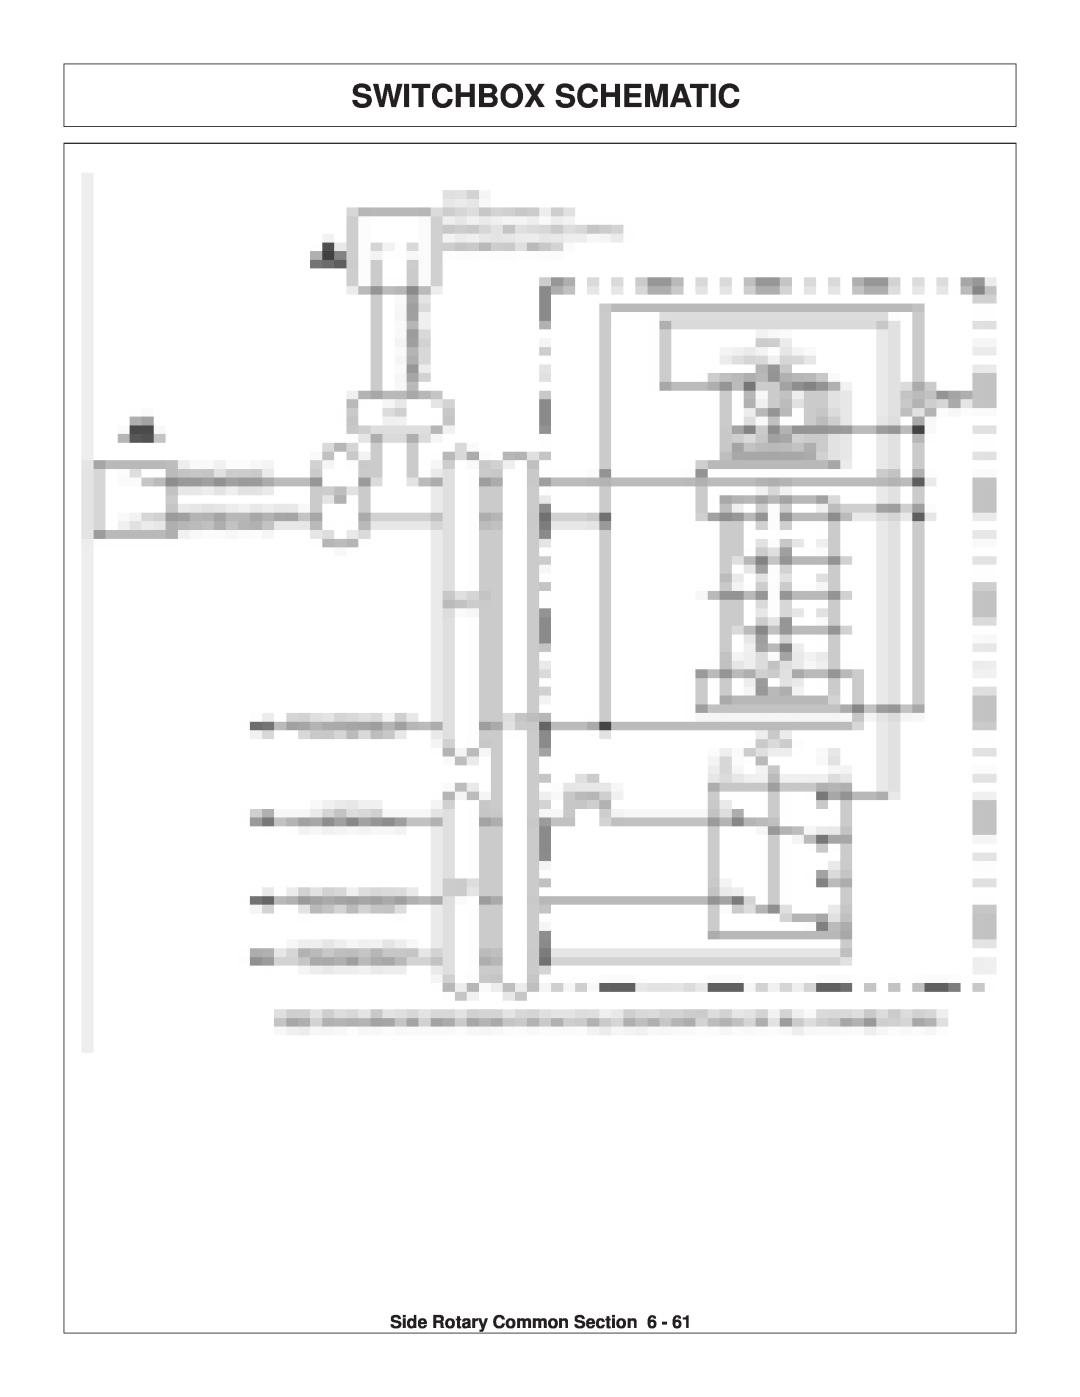 Tiger Products Co., Ltd TS 100A manual Switchbox Schematic, Side Rotary Common 